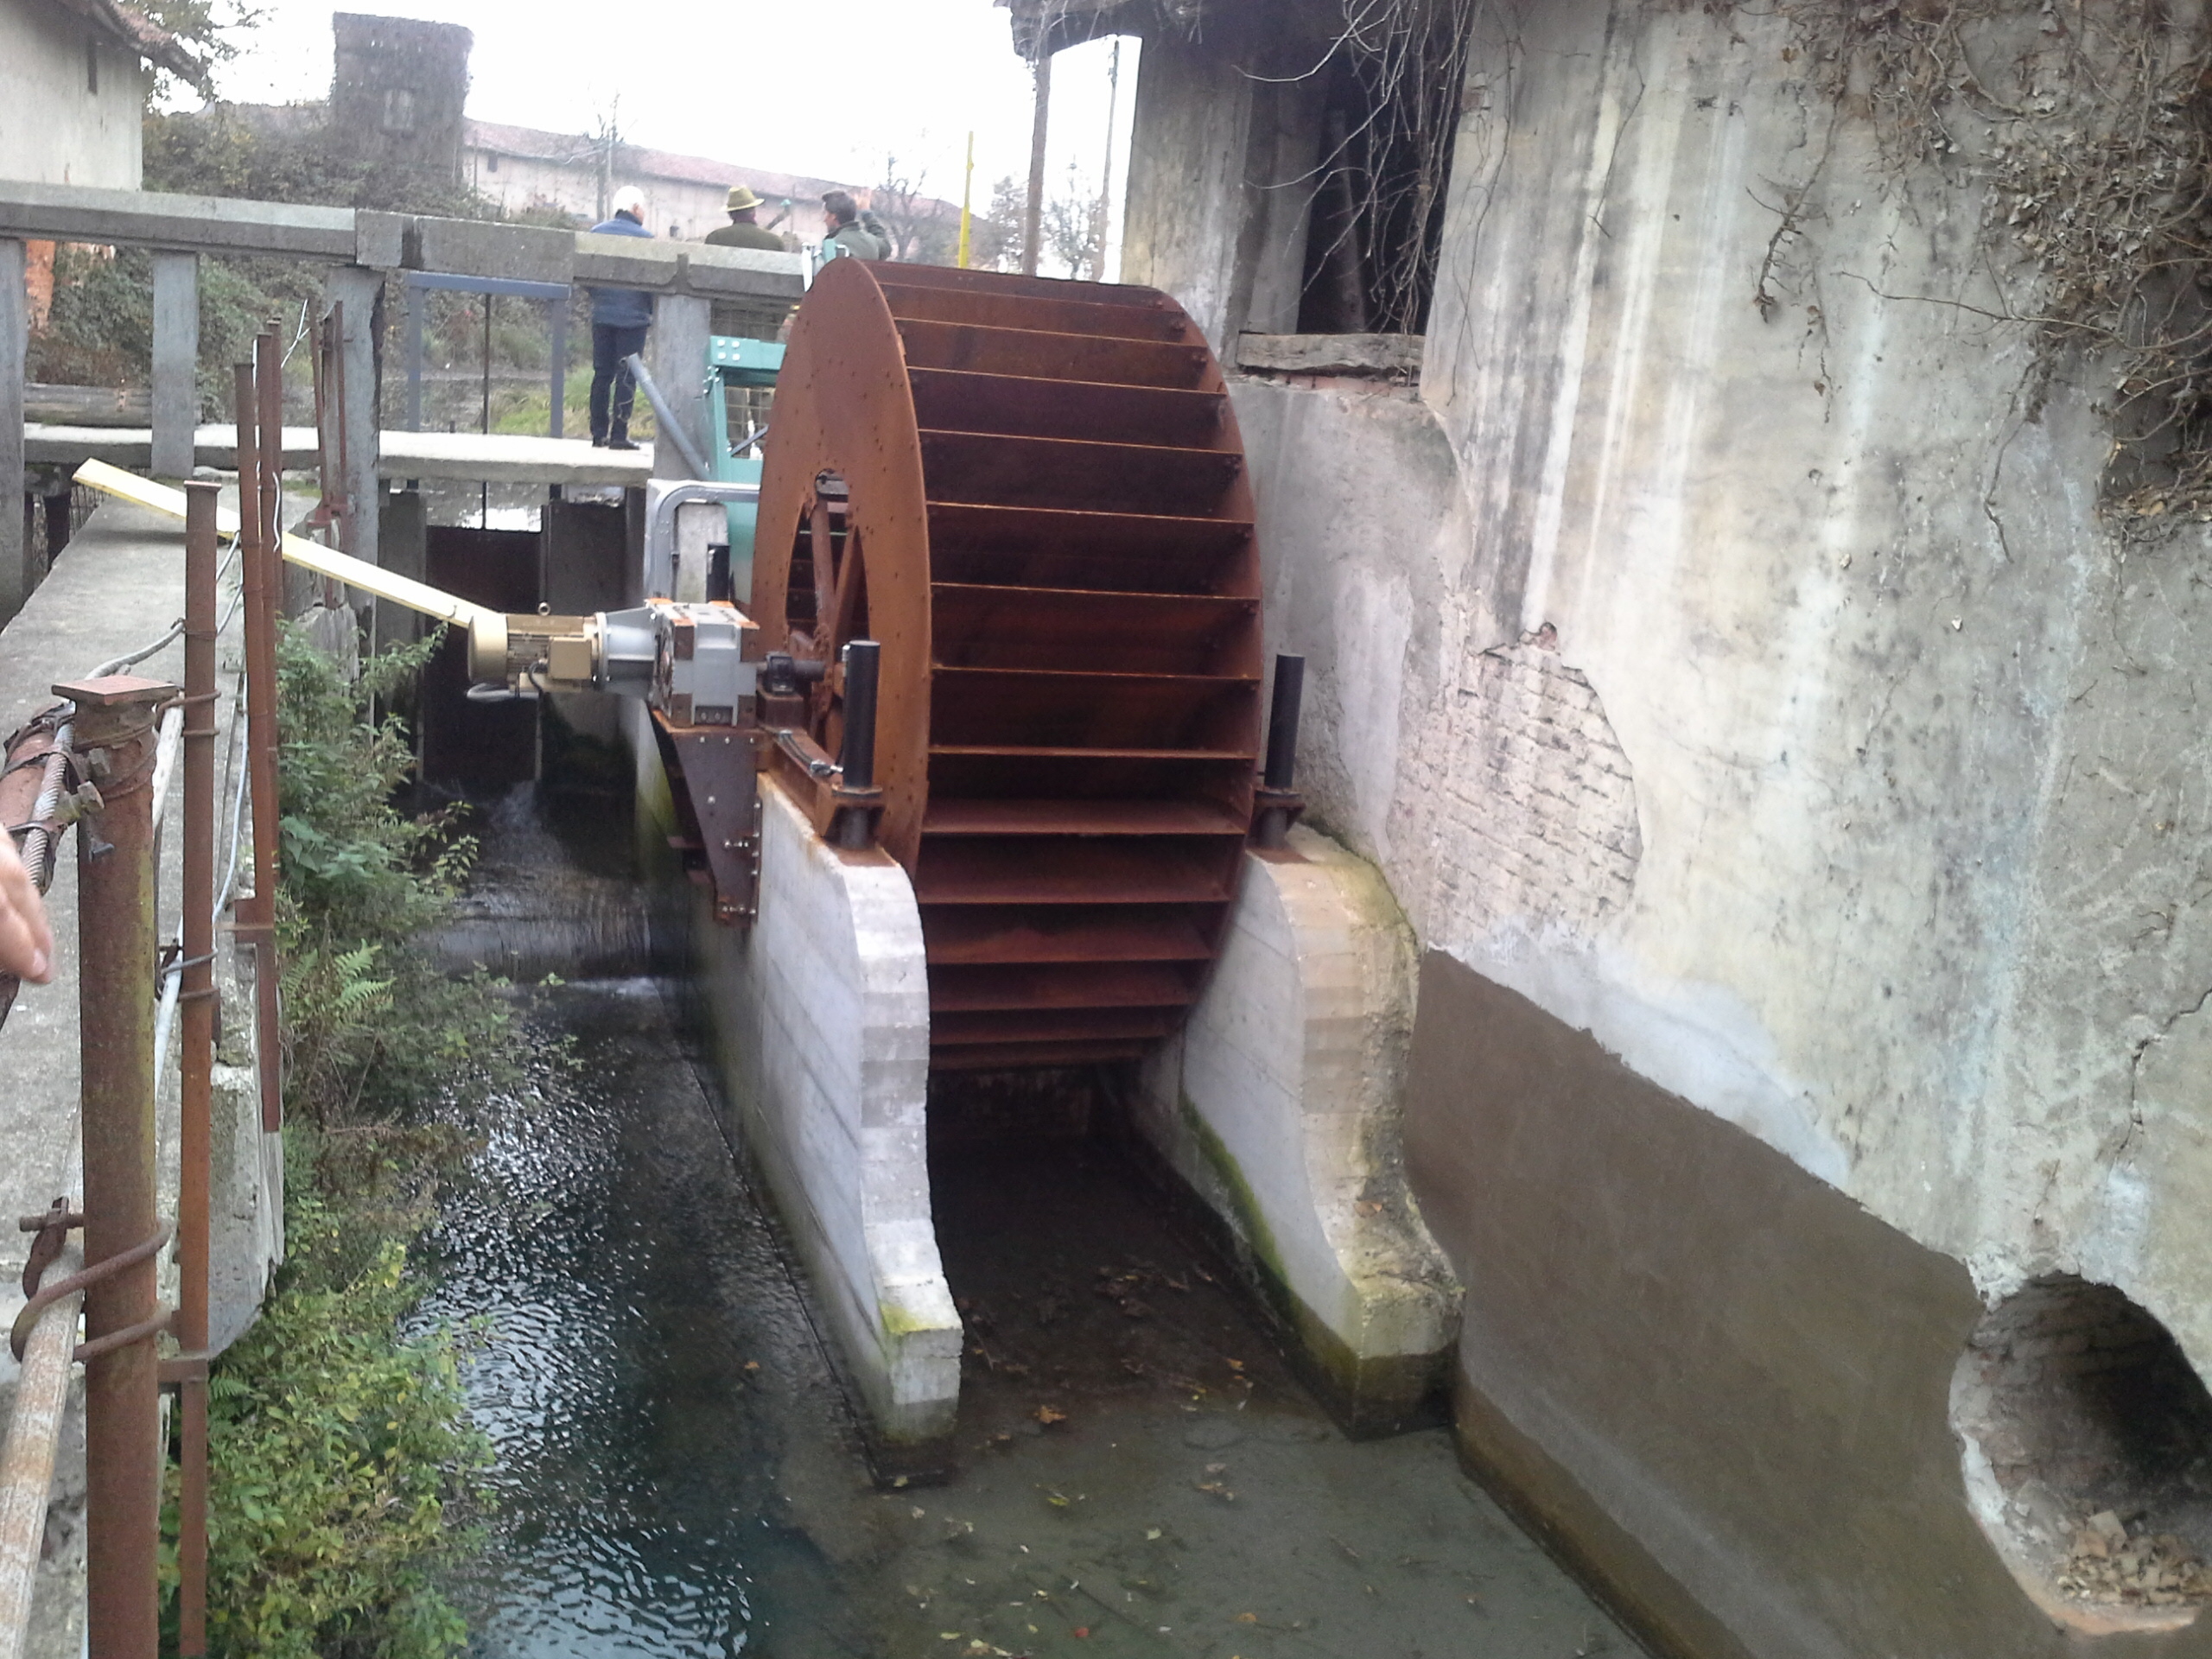 Are water wheels fish friendly technologies?Yes, here it is explained in my scientific paper!https://www.sciencedirect.com/science/article/pii/S...